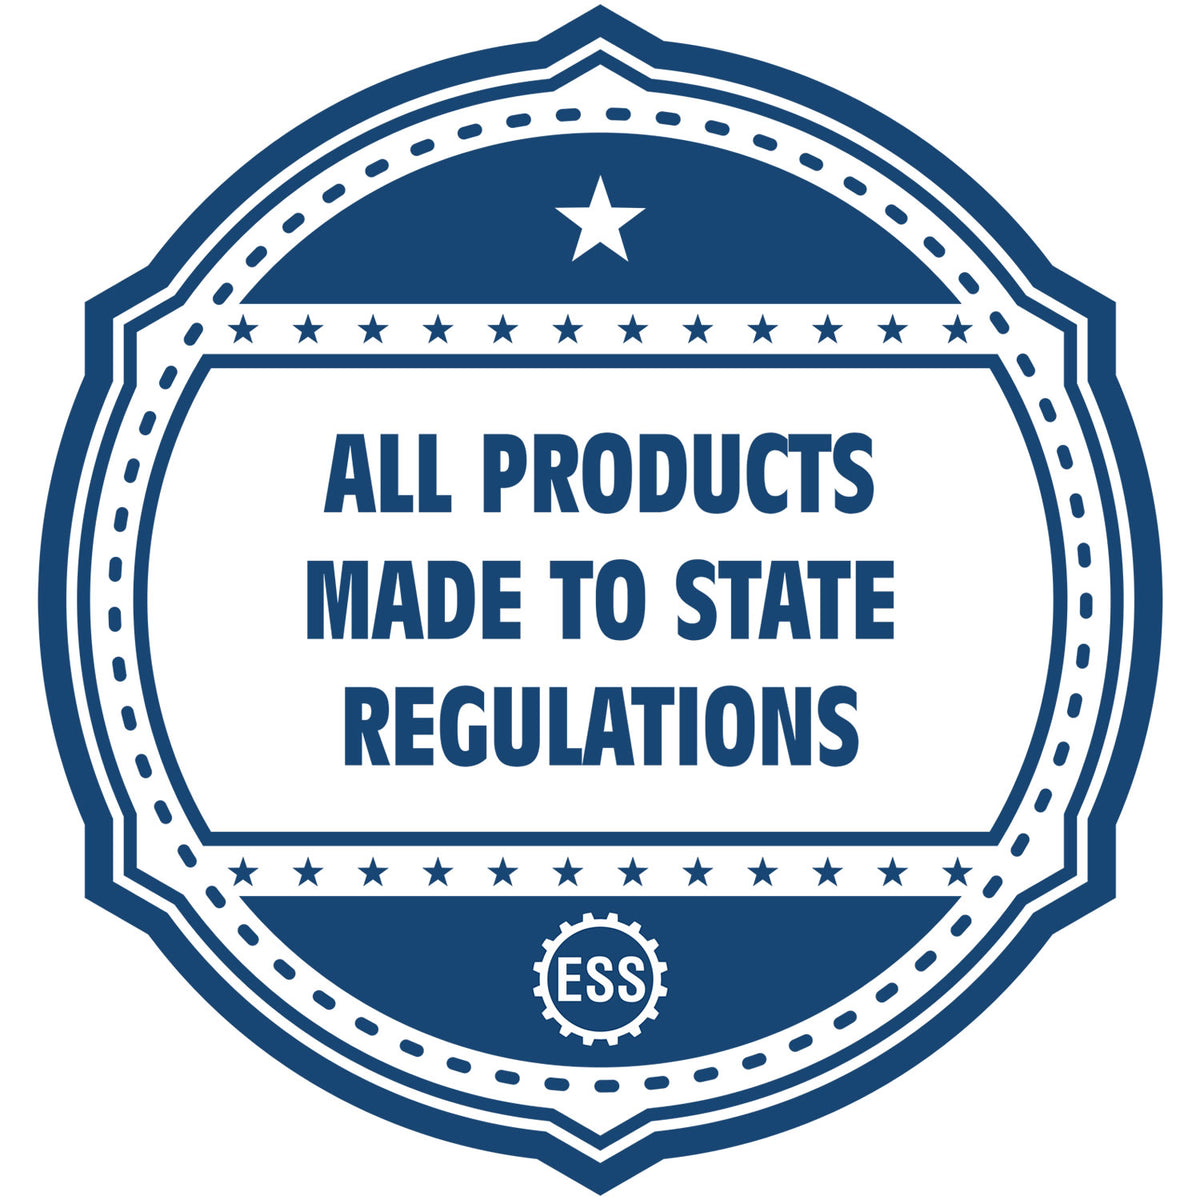 An icon or badge element for the Extended Long Reach North Dakota Architect Seal Embosser showing that this product is made in compliance with state regulations.